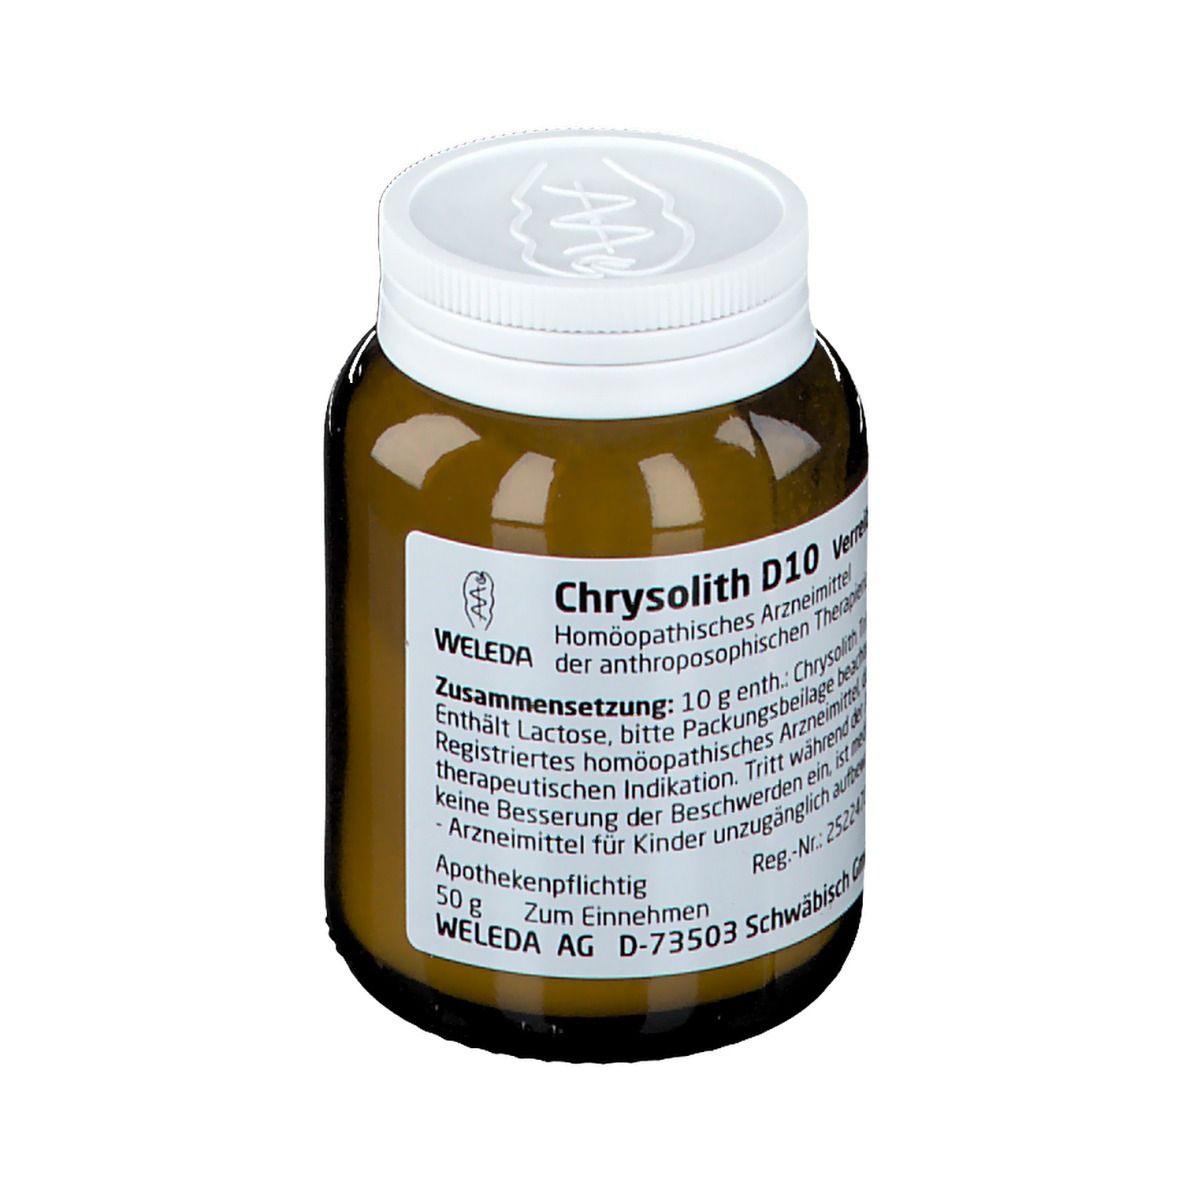 Chrysolith D10 Trituration